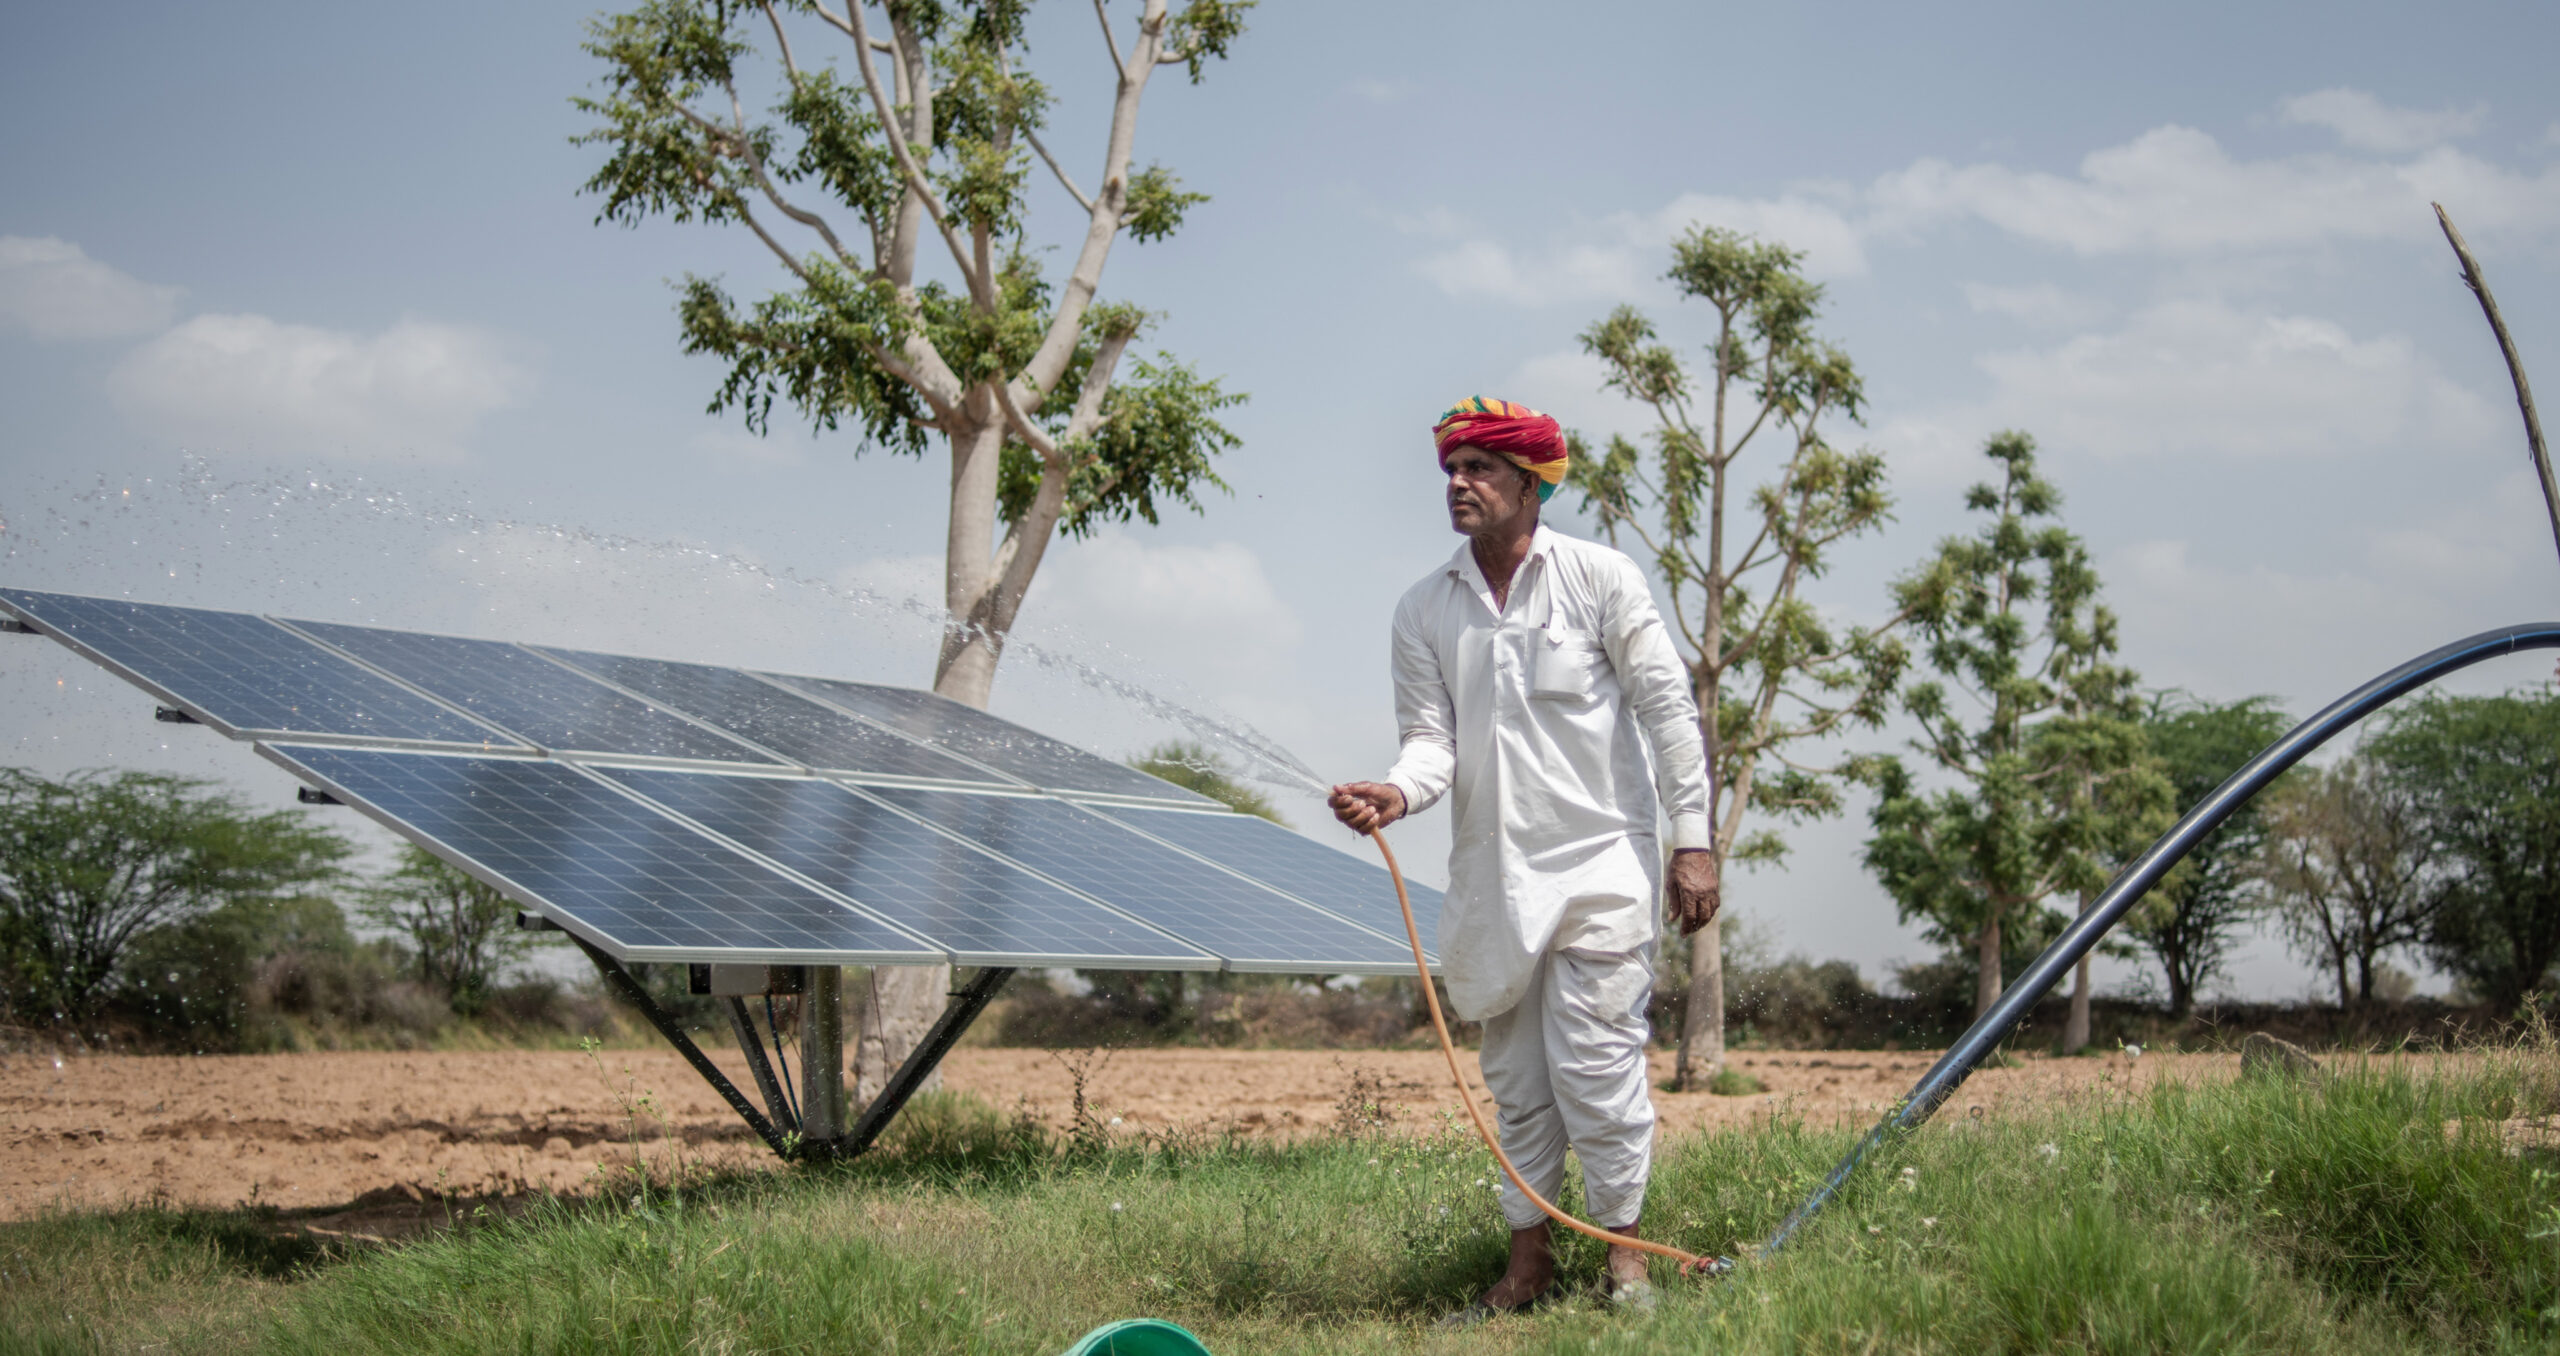 Solar panels powering a water pump on an Indian farm. The sustainability bonds market aims to finance projects that can bring social benefits as well as sustainable outcomes. (Photo: Rebecca Conway/Getty Images) 